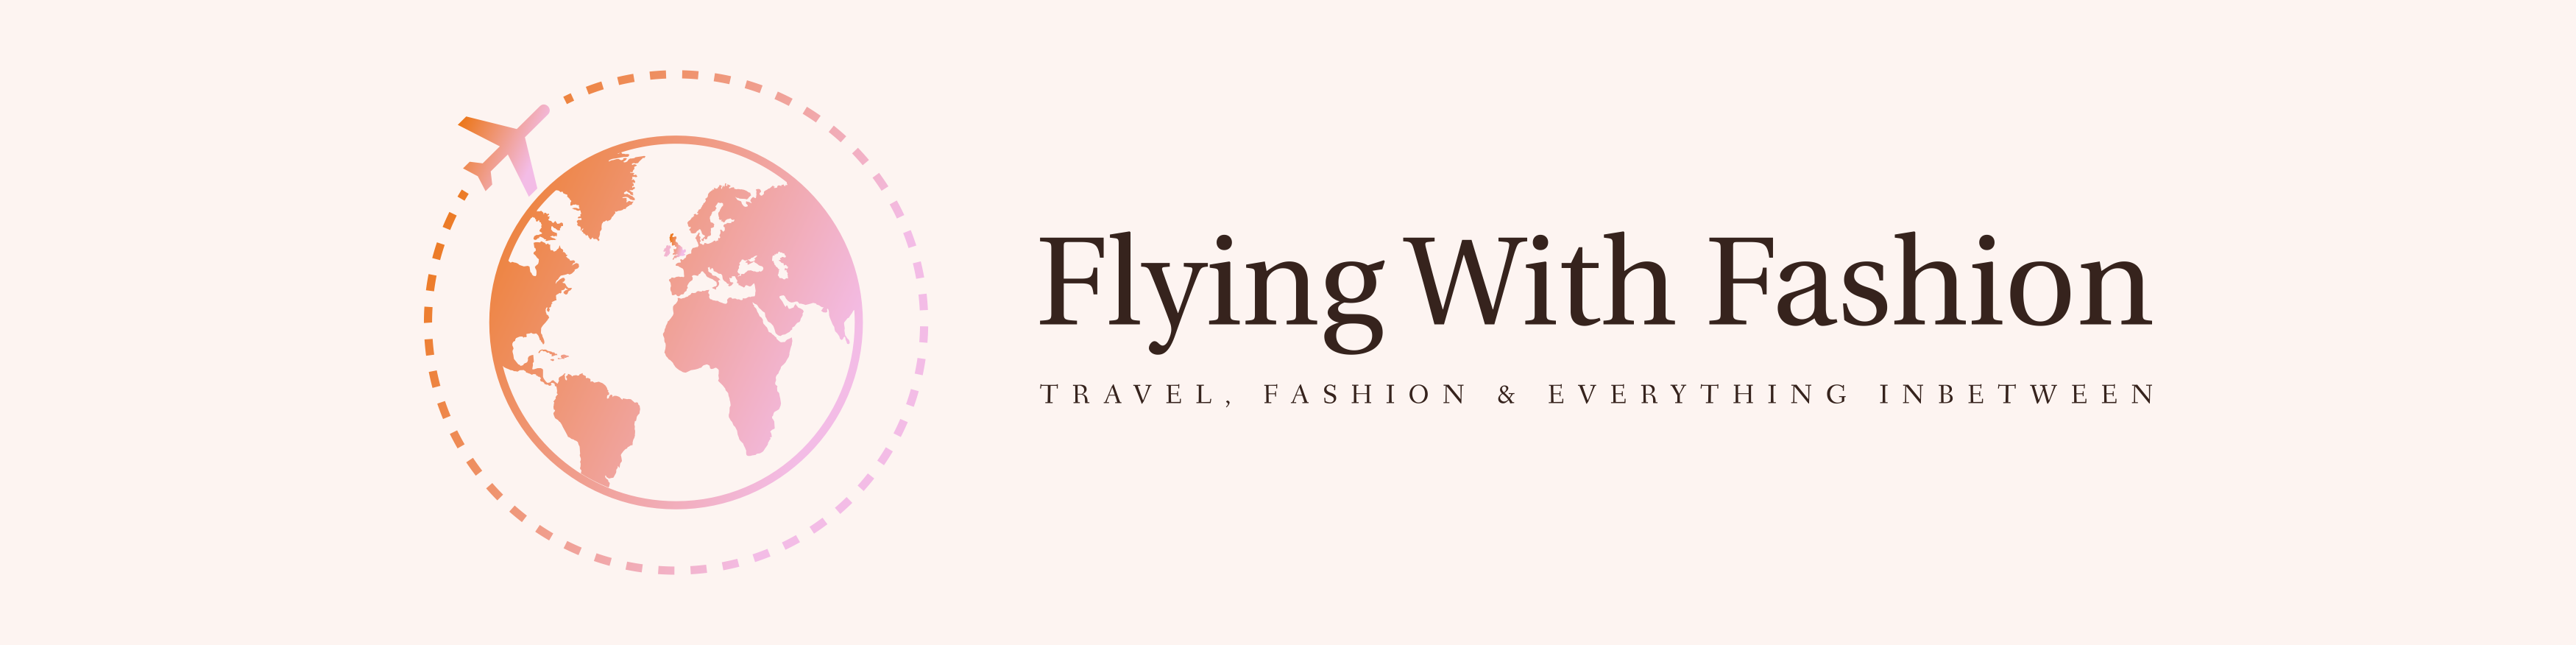 Flying With Fashion